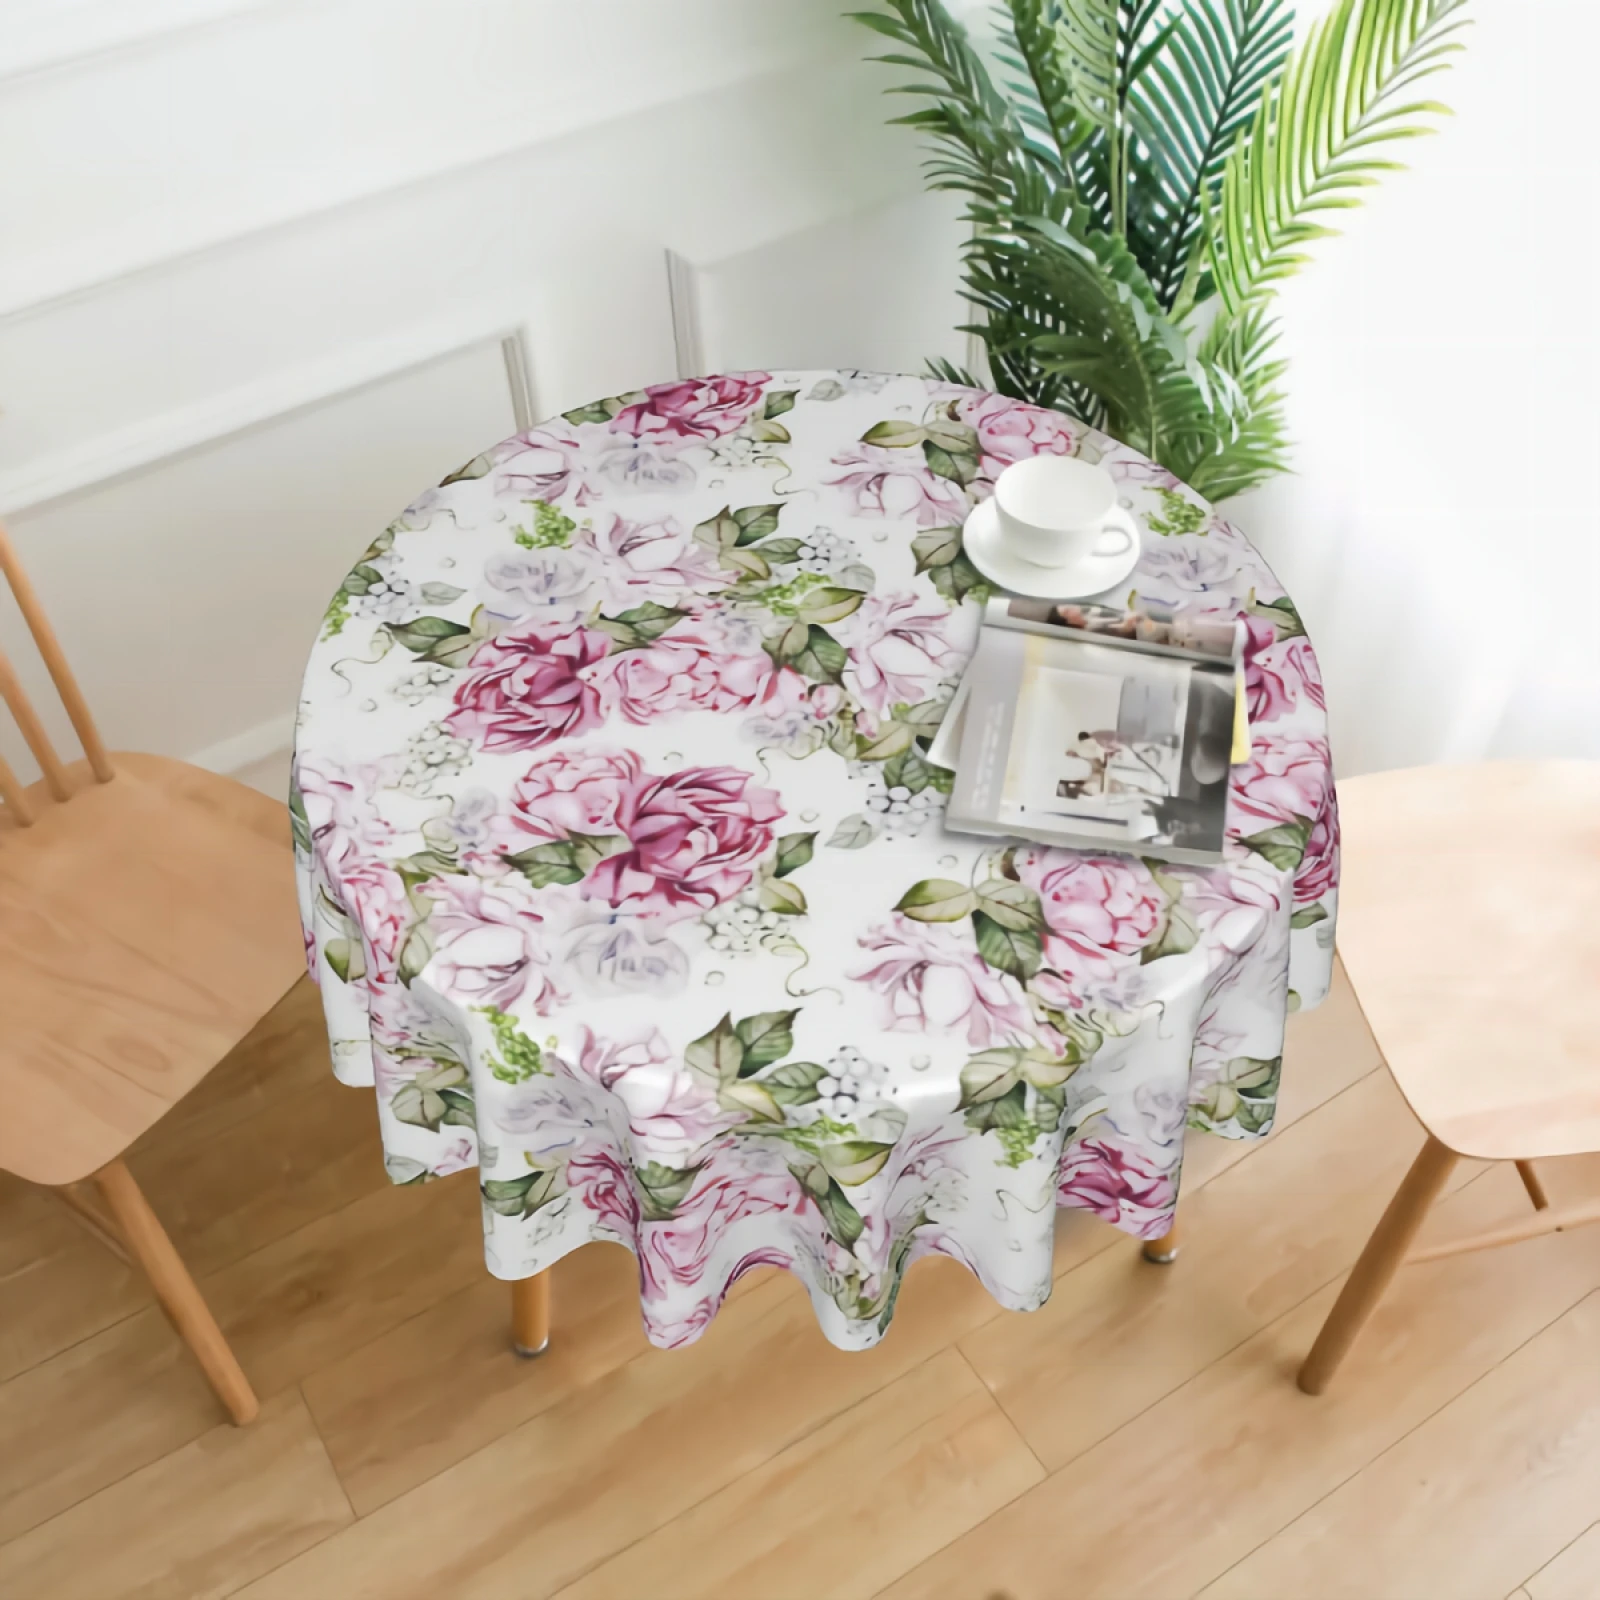 

Pink Watercolor Rose Peony Table Cloth with Dust-Proof Wrinkle Resistant Waterproof Decorative Table Cover